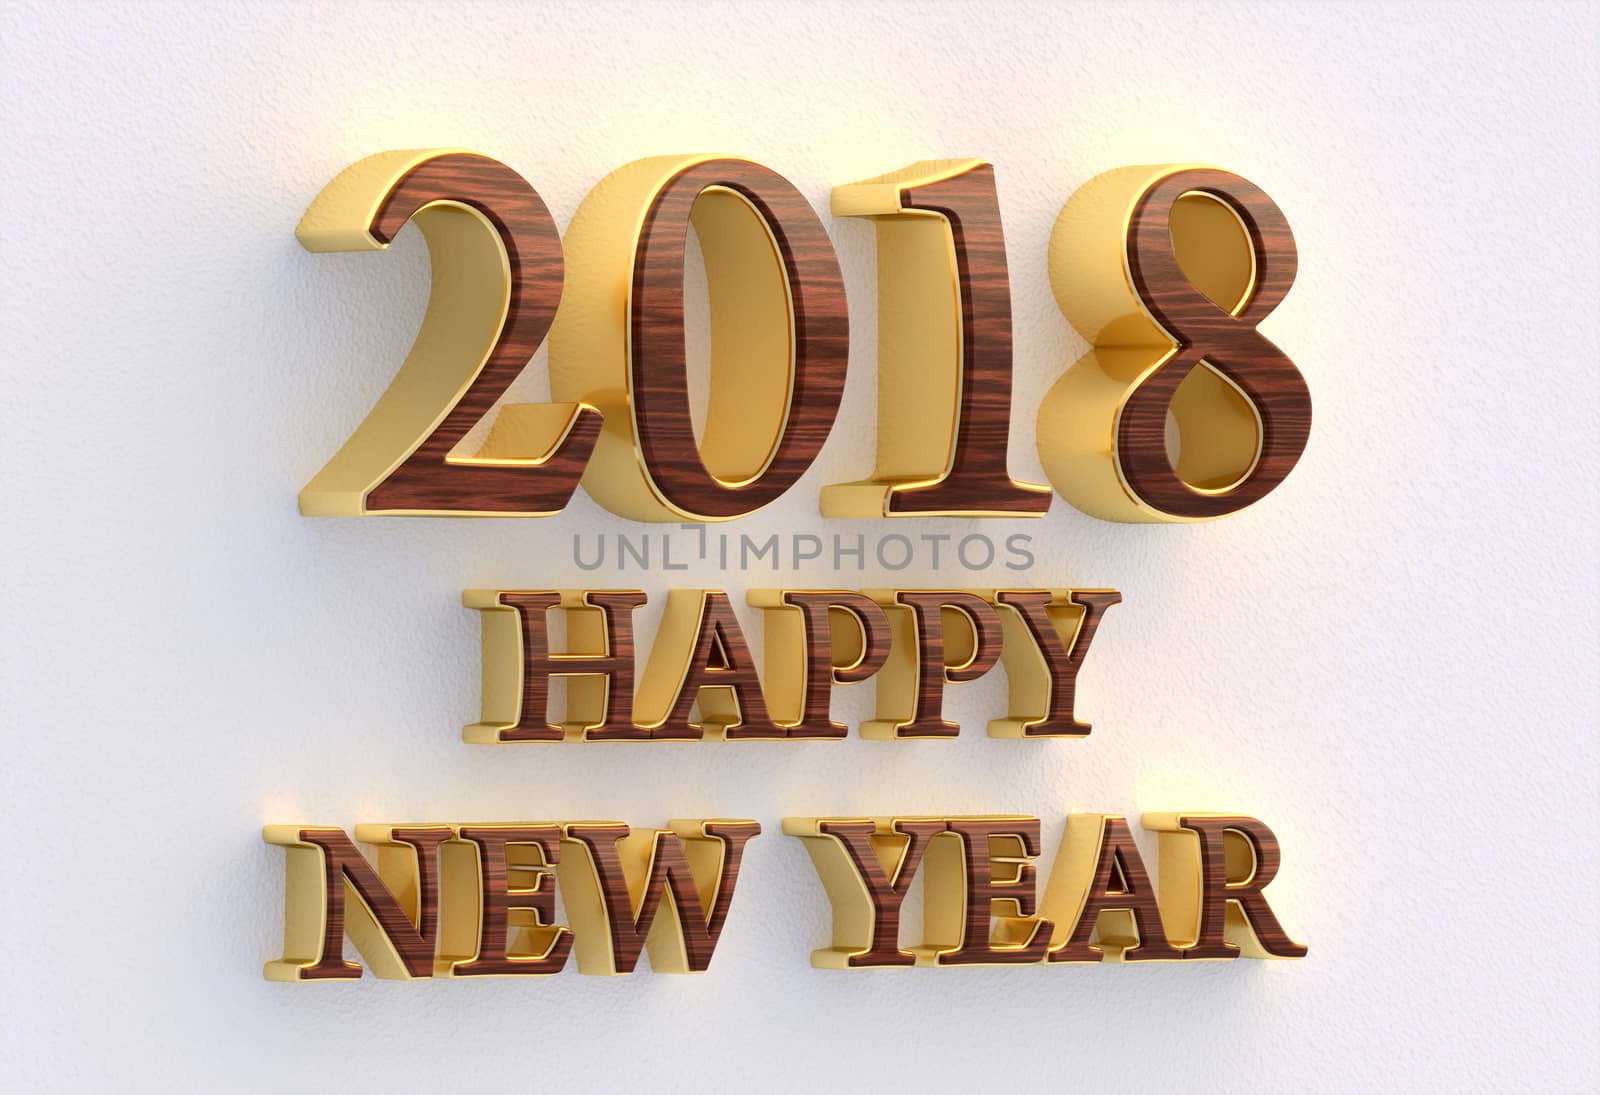 Happy New Year 2018. Gold and wood text - 3D design template on white wall.